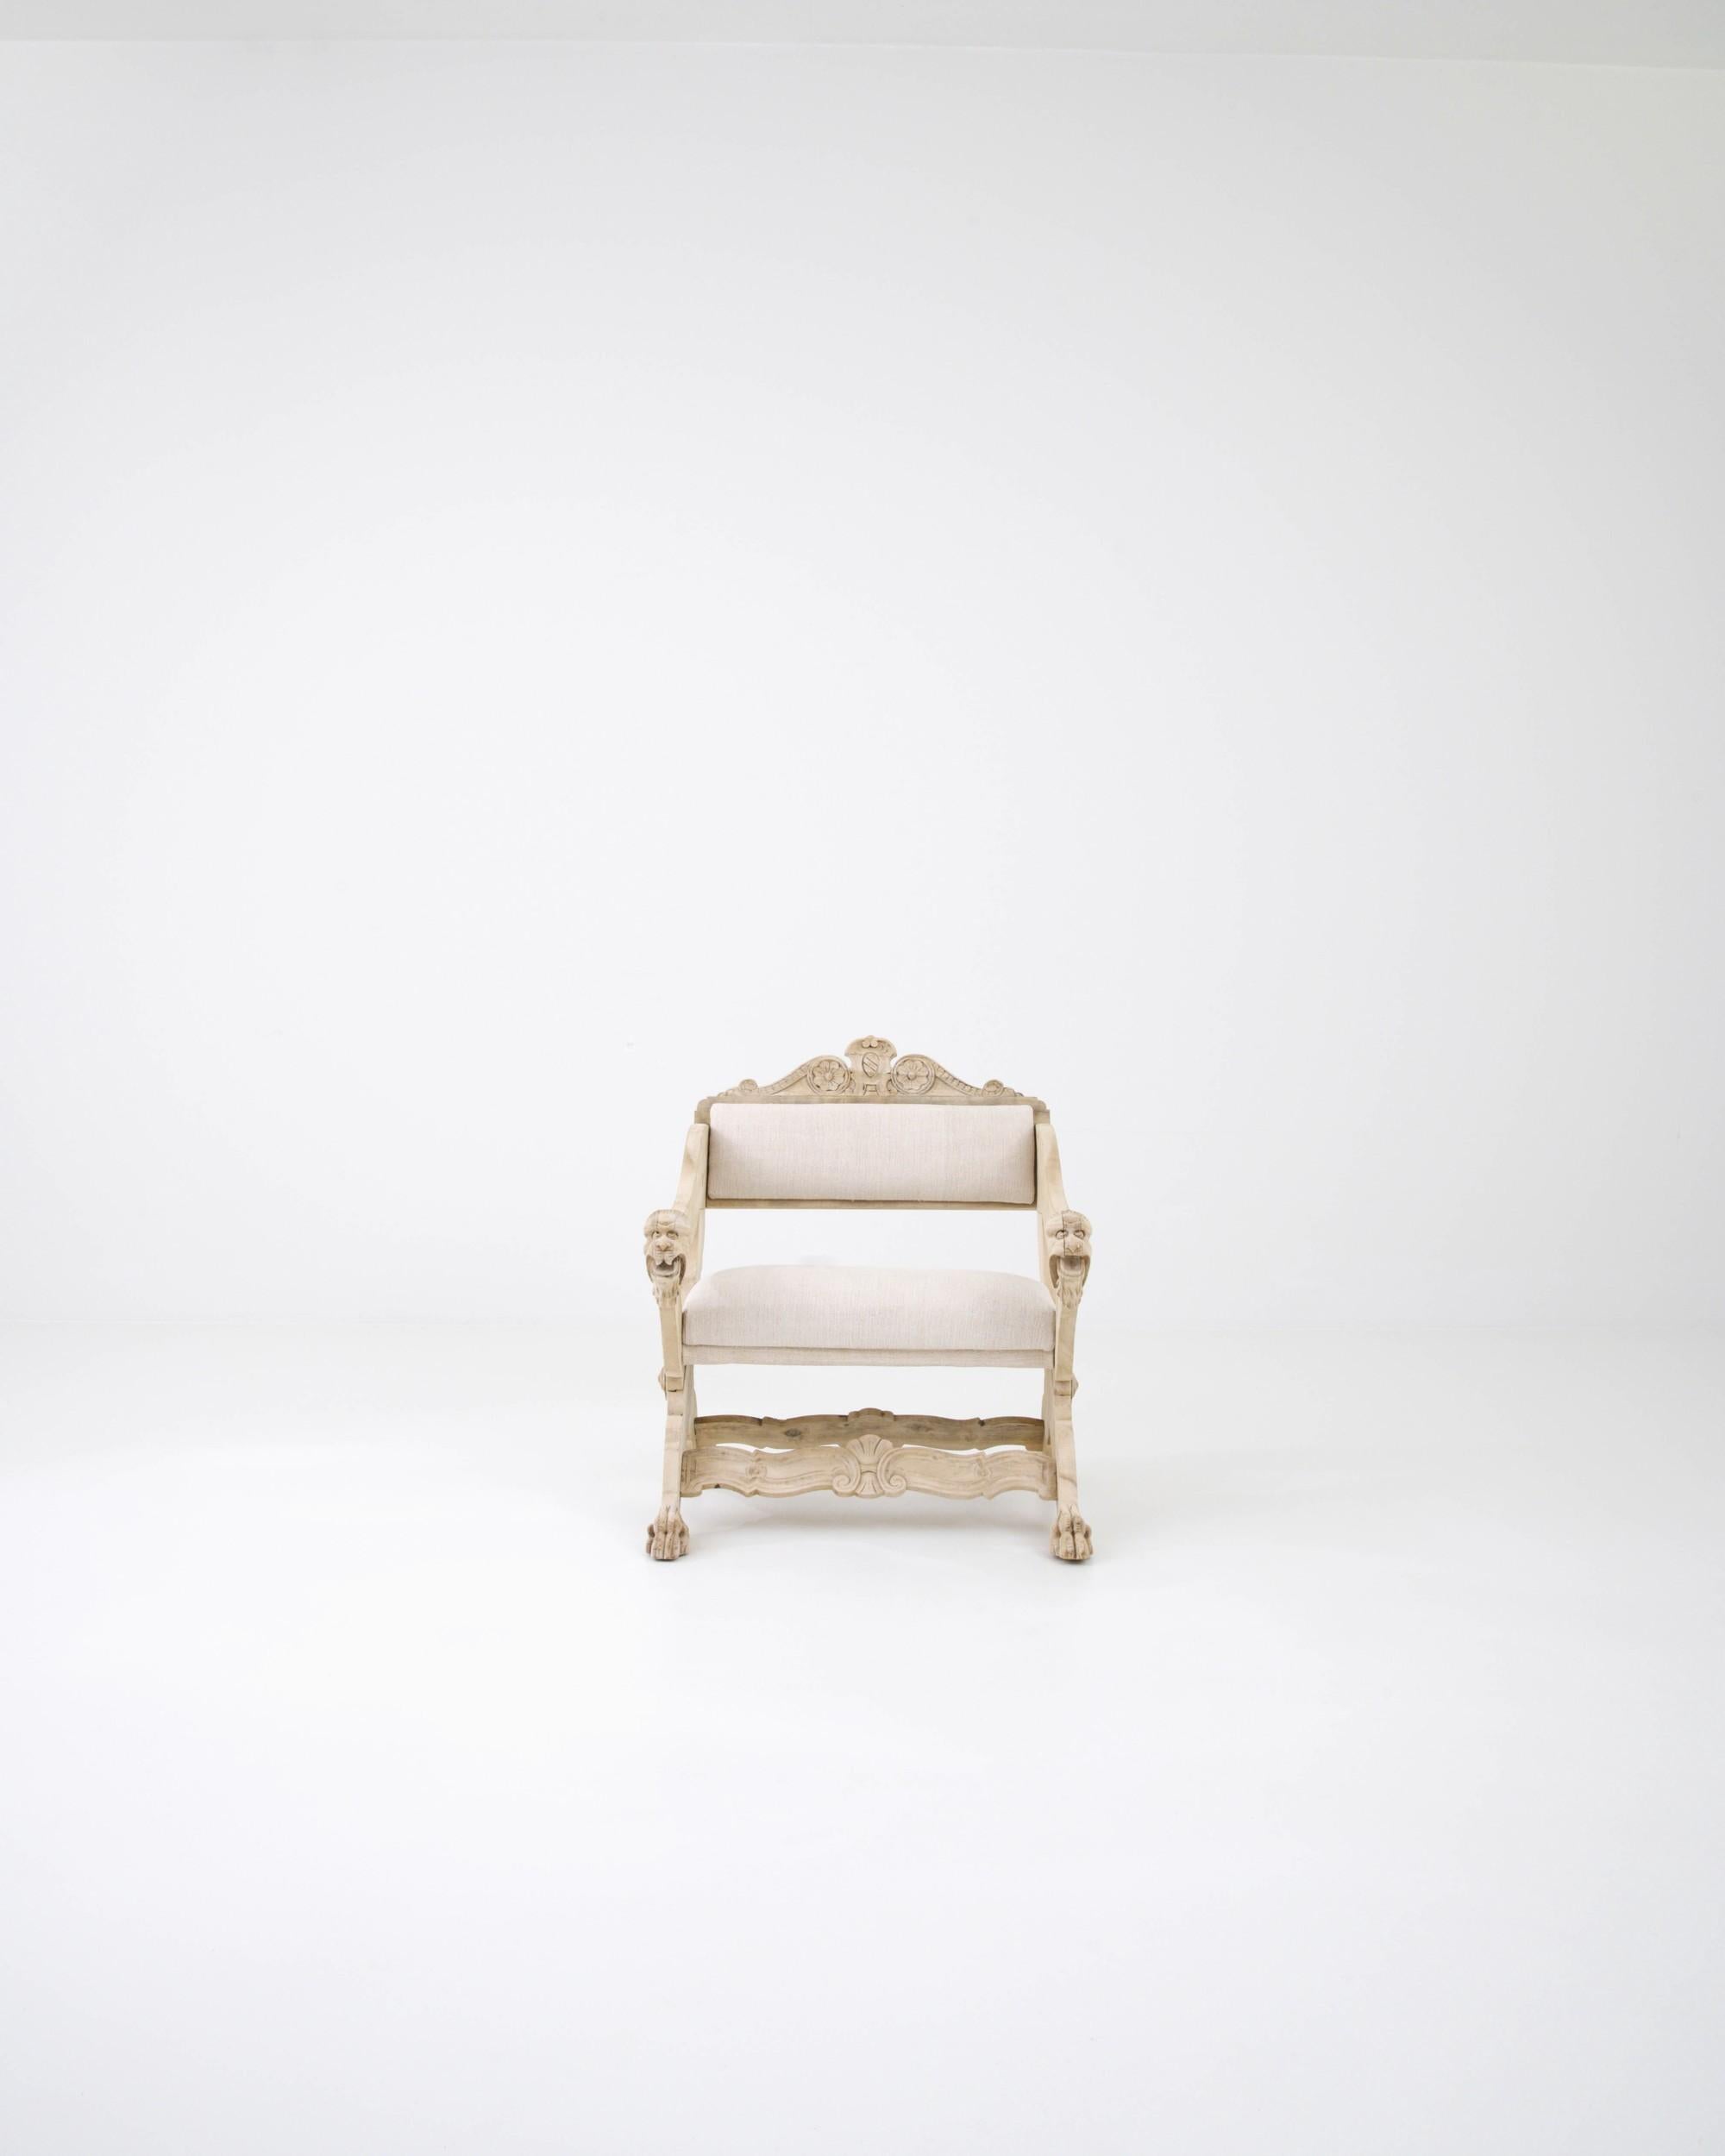 The blend of wood, bleached to a tone reminiscent of ivory, and the light upholstery of the seat gives this 20th-century Belgian armchair an exquisite accent. The wooden base showcases carved rosettes and foliate elements, with expertly executed